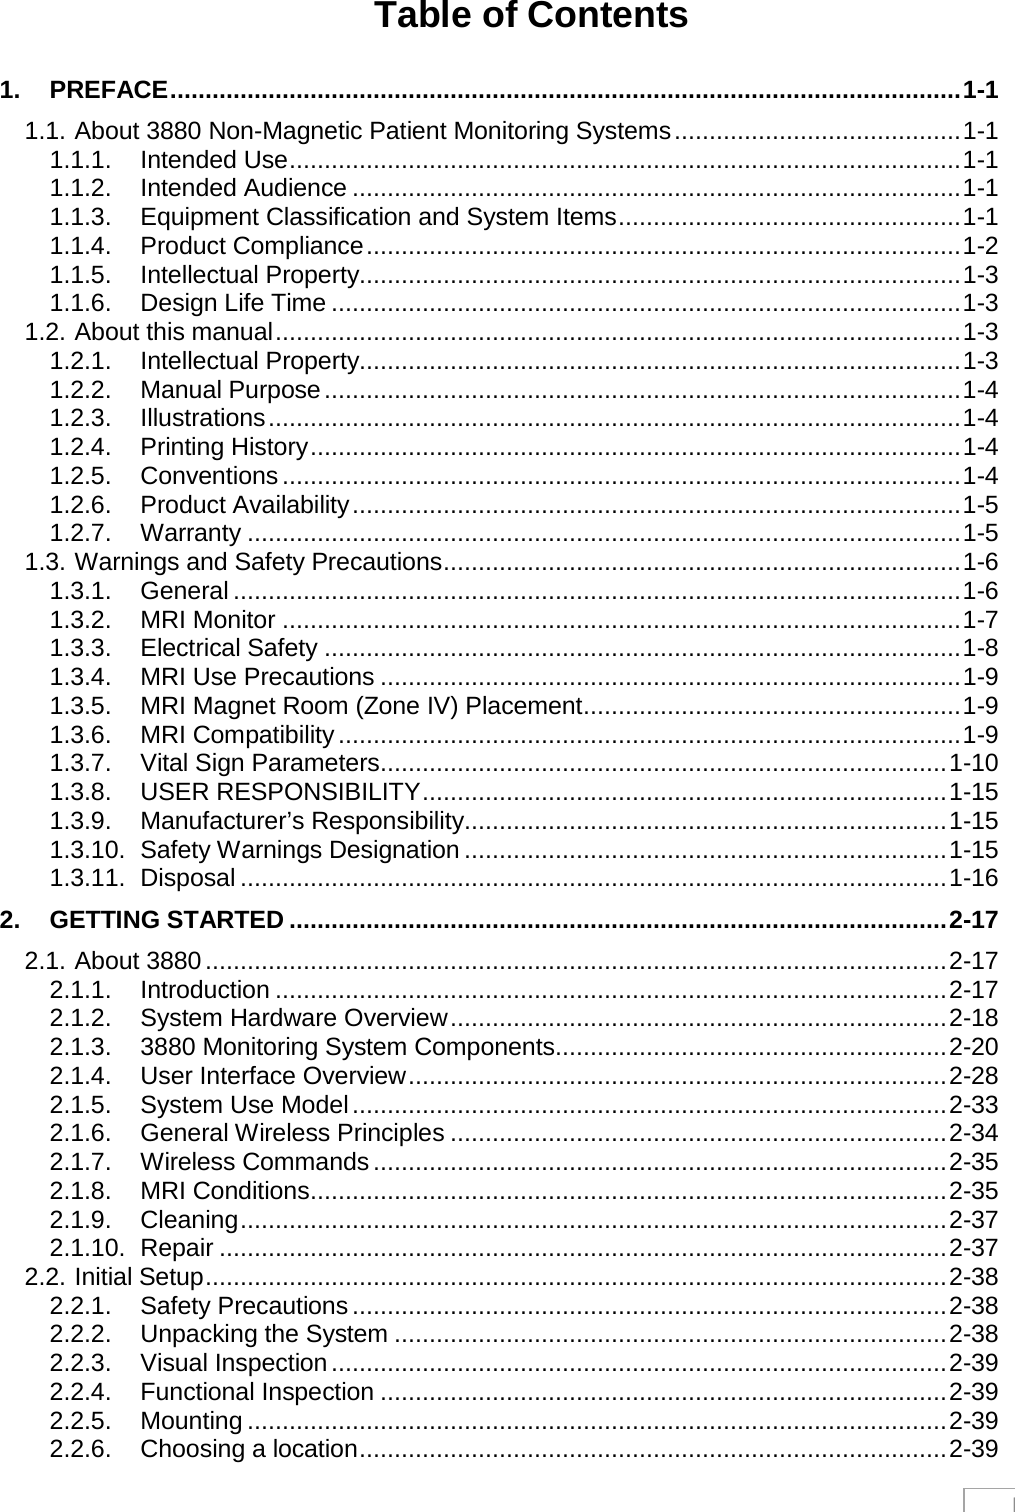  I Table of Contents  1. PREFACE ................................................................................................................. 1-1 1.1. About 3880 Non-Magnetic Patient Monitoring Systems ......................................... 1-1 1.1.1. Intended Use ................................................................................................ 1-1 1.1.2. Intended Audience ....................................................................................... 1-1 1.1.3. Equipment Classification and System Items ................................................. 1-1 1.1.4. Product Compliance ..................................................................................... 1-2 1.1.5. Intellectual Property...................................................................................... 1-3 1.1.6. Design Life Time .......................................................................................... 1-3 1.2. About this manual .................................................................................................. 1-3 1.2.1. Intellectual Property...................................................................................... 1-3 1.2.2. Manual Purpose ........................................................................................... 1-4 1.2.3. Illustrations ................................................................................................... 1-4 1.2.4. Printing History ............................................................................................. 1-4 1.2.5. Conventions ................................................................................................. 1-4 1.2.6. Product Availability ....................................................................................... 1-5 1.2.7. Warranty ...................................................................................................... 1-5 1.3. Warnings and Safety Precautions .......................................................................... 1-6 1.3.1. General ........................................................................................................ 1-6 1.3.2. MRI Monitor ................................................................................................. 1-7 1.3.3. Electrical Safety ........................................................................................... 1-8 1.3.4. MRI Use Precautions ................................................................................... 1-9 1.3.5. MRI Magnet Room (Zone IV) Placement ...................................................... 1-9 1.3.6. MRI Compatibility ......................................................................................... 1-9 1.3.7. Vital Sign Parameters ................................................................................. 1-10 1.3.8. USER RESPONSIBILITY ........................................................................... 1-15 1.3.9. Manufacturer’s Responsibility ..................................................................... 1-15 1.3.10. Safety Warnings Designation ..................................................................... 1-15 1.3.11. Disposal ..................................................................................................... 1-16 2. GETTING STARTED .............................................................................................. 2-17 2.1. About 3880 .......................................................................................................... 2-17 2.1.1. Introduction ................................................................................................ 2-17 2.1.2. System Hardware Overview ....................................................................... 2-18 2.1.3. 3880 Monitoring System Components........................................................ 2-20 2.1.4. User Interface Overview ............................................................................. 2-28 2.1.5. System Use Model ..................................................................................... 2-33 2.1.6. General Wireless Principles ....................................................................... 2-34 2.1.7. Wireless Commands .................................................................................. 2-35 2.1.8. MRI Conditions ........................................................................................... 2-35 2.1.9. Cleaning ..................................................................................................... 2-37 2.1.10. Repair ........................................................................................................ 2-37 2.2. Initial Setup .......................................................................................................... 2-38 2.2.1. Safety Precautions ..................................................................................... 2-38 2.2.2. Unpacking the System ............................................................................... 2-38 2.2.3. Visual Inspection ........................................................................................ 2-39 2.2.4. Functional Inspection ................................................................................. 2-39 2.2.5. Mounting .................................................................................................... 2-39 2.2.6. Choosing a location .................................................................................... 2-39 